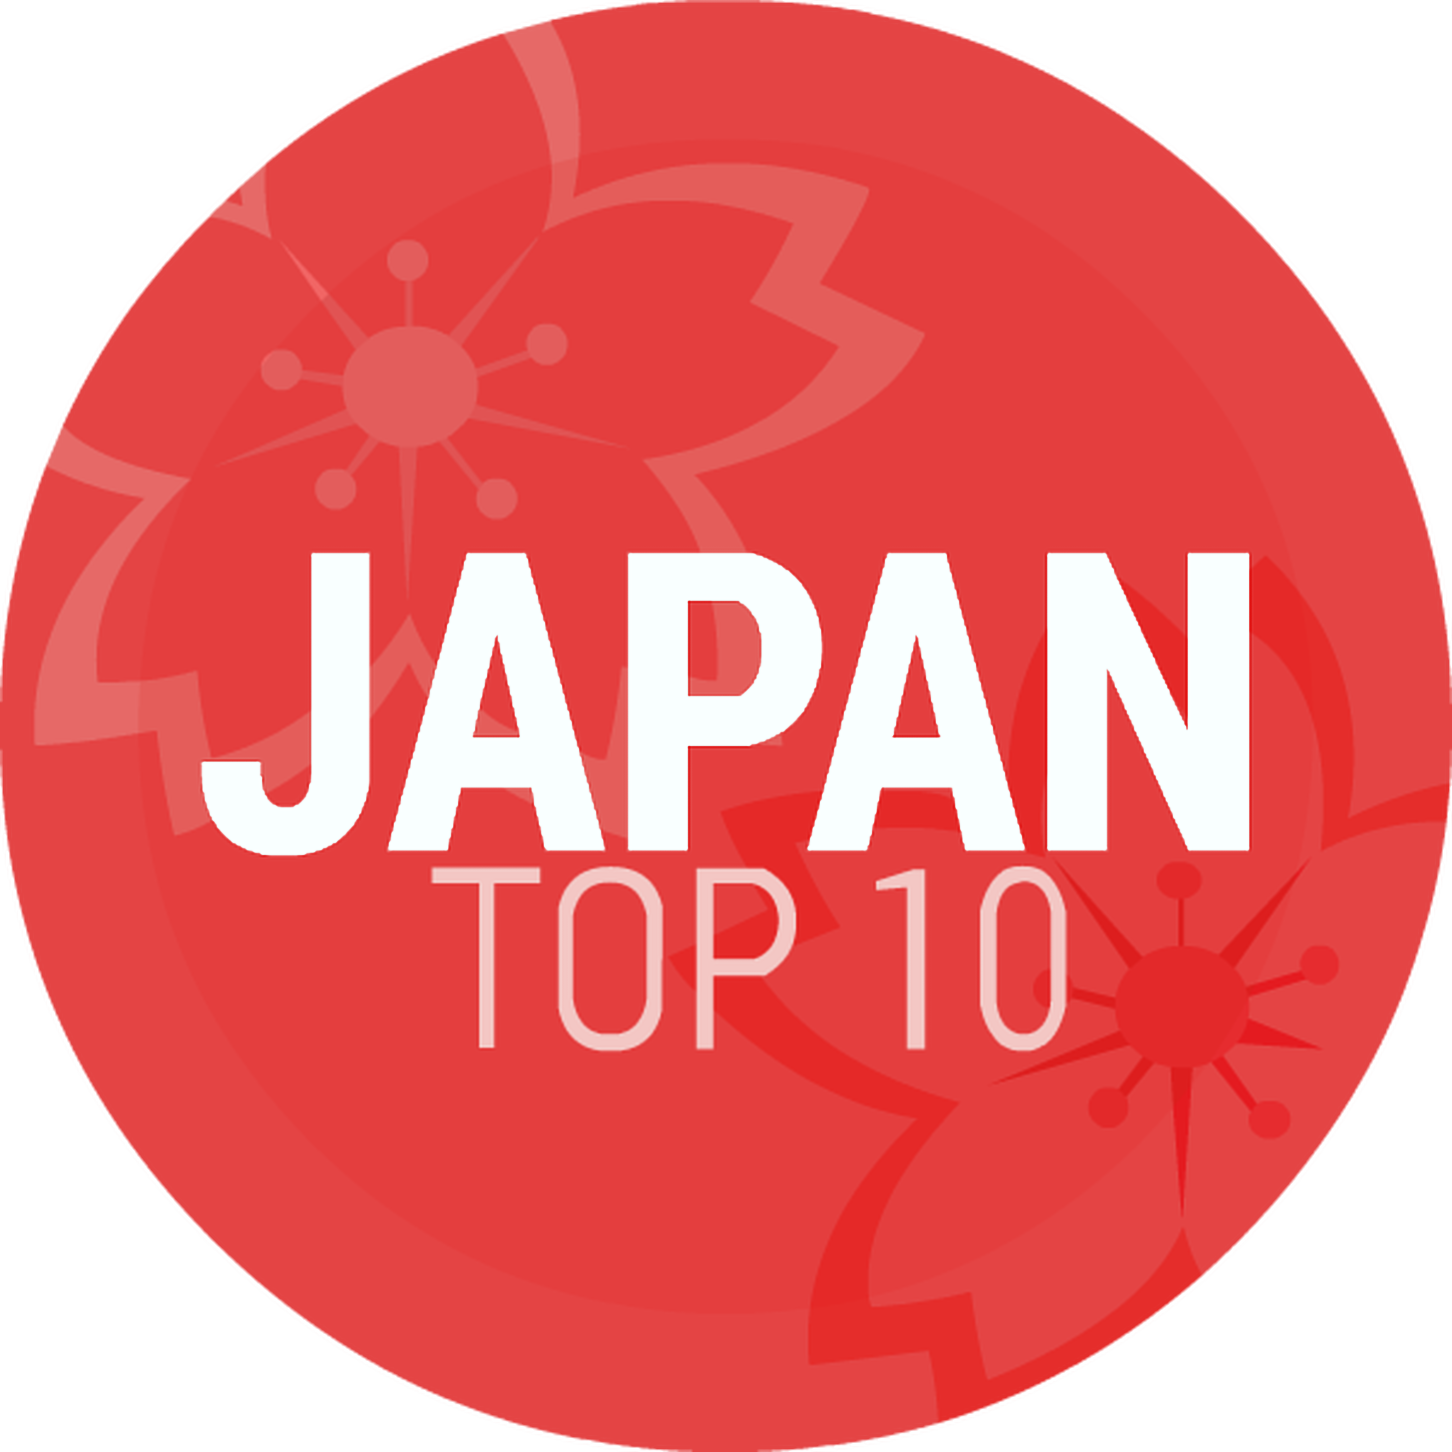 Episode 142: Japan Top 10 June 2016 Special: All In The 70's